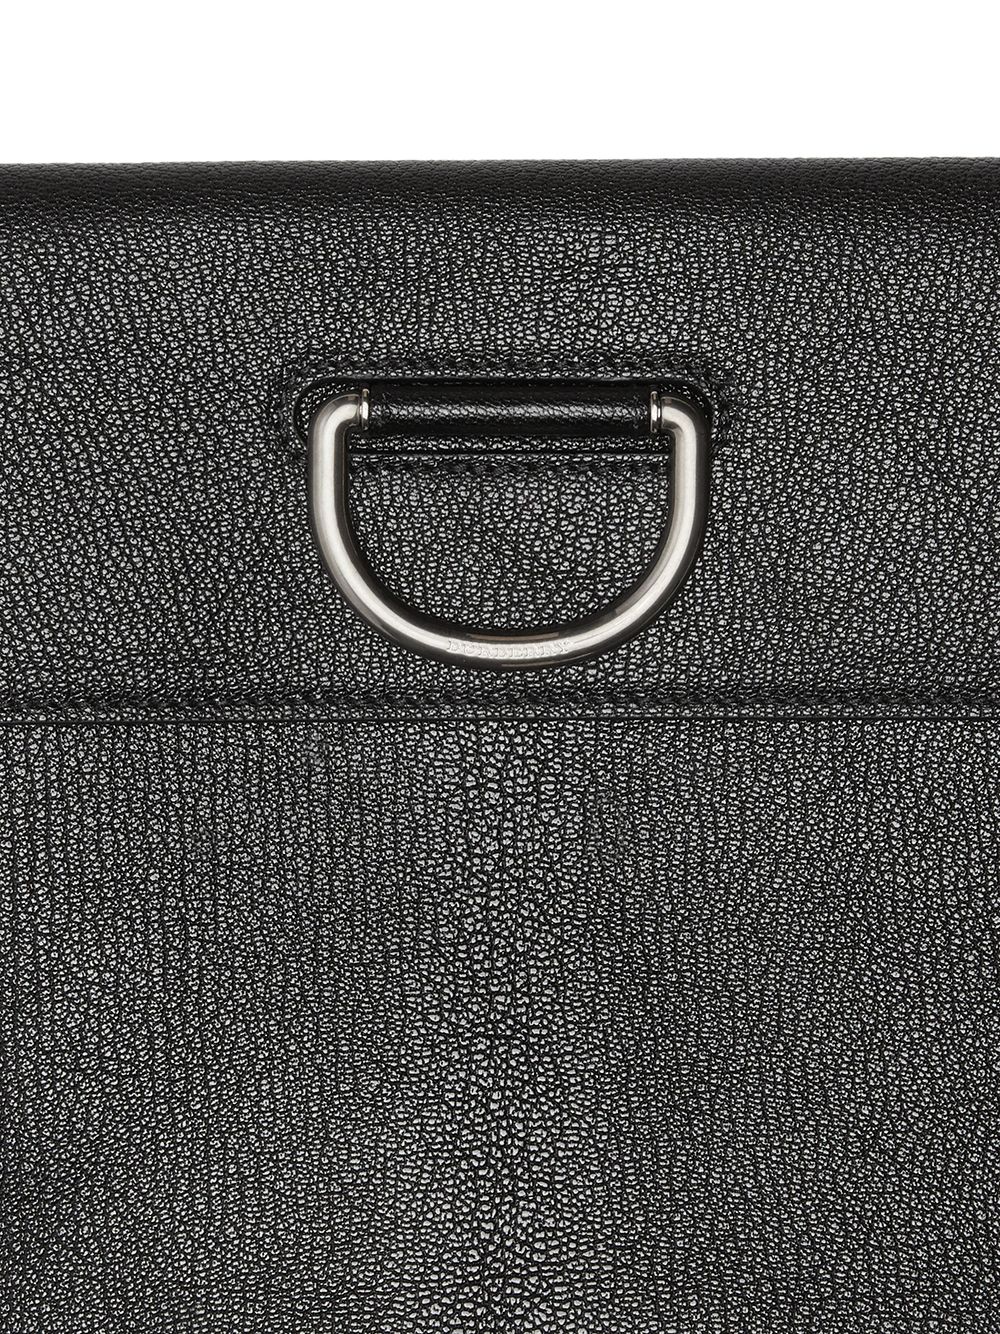 Burberry D-ring Leather Pouch - Farfetch